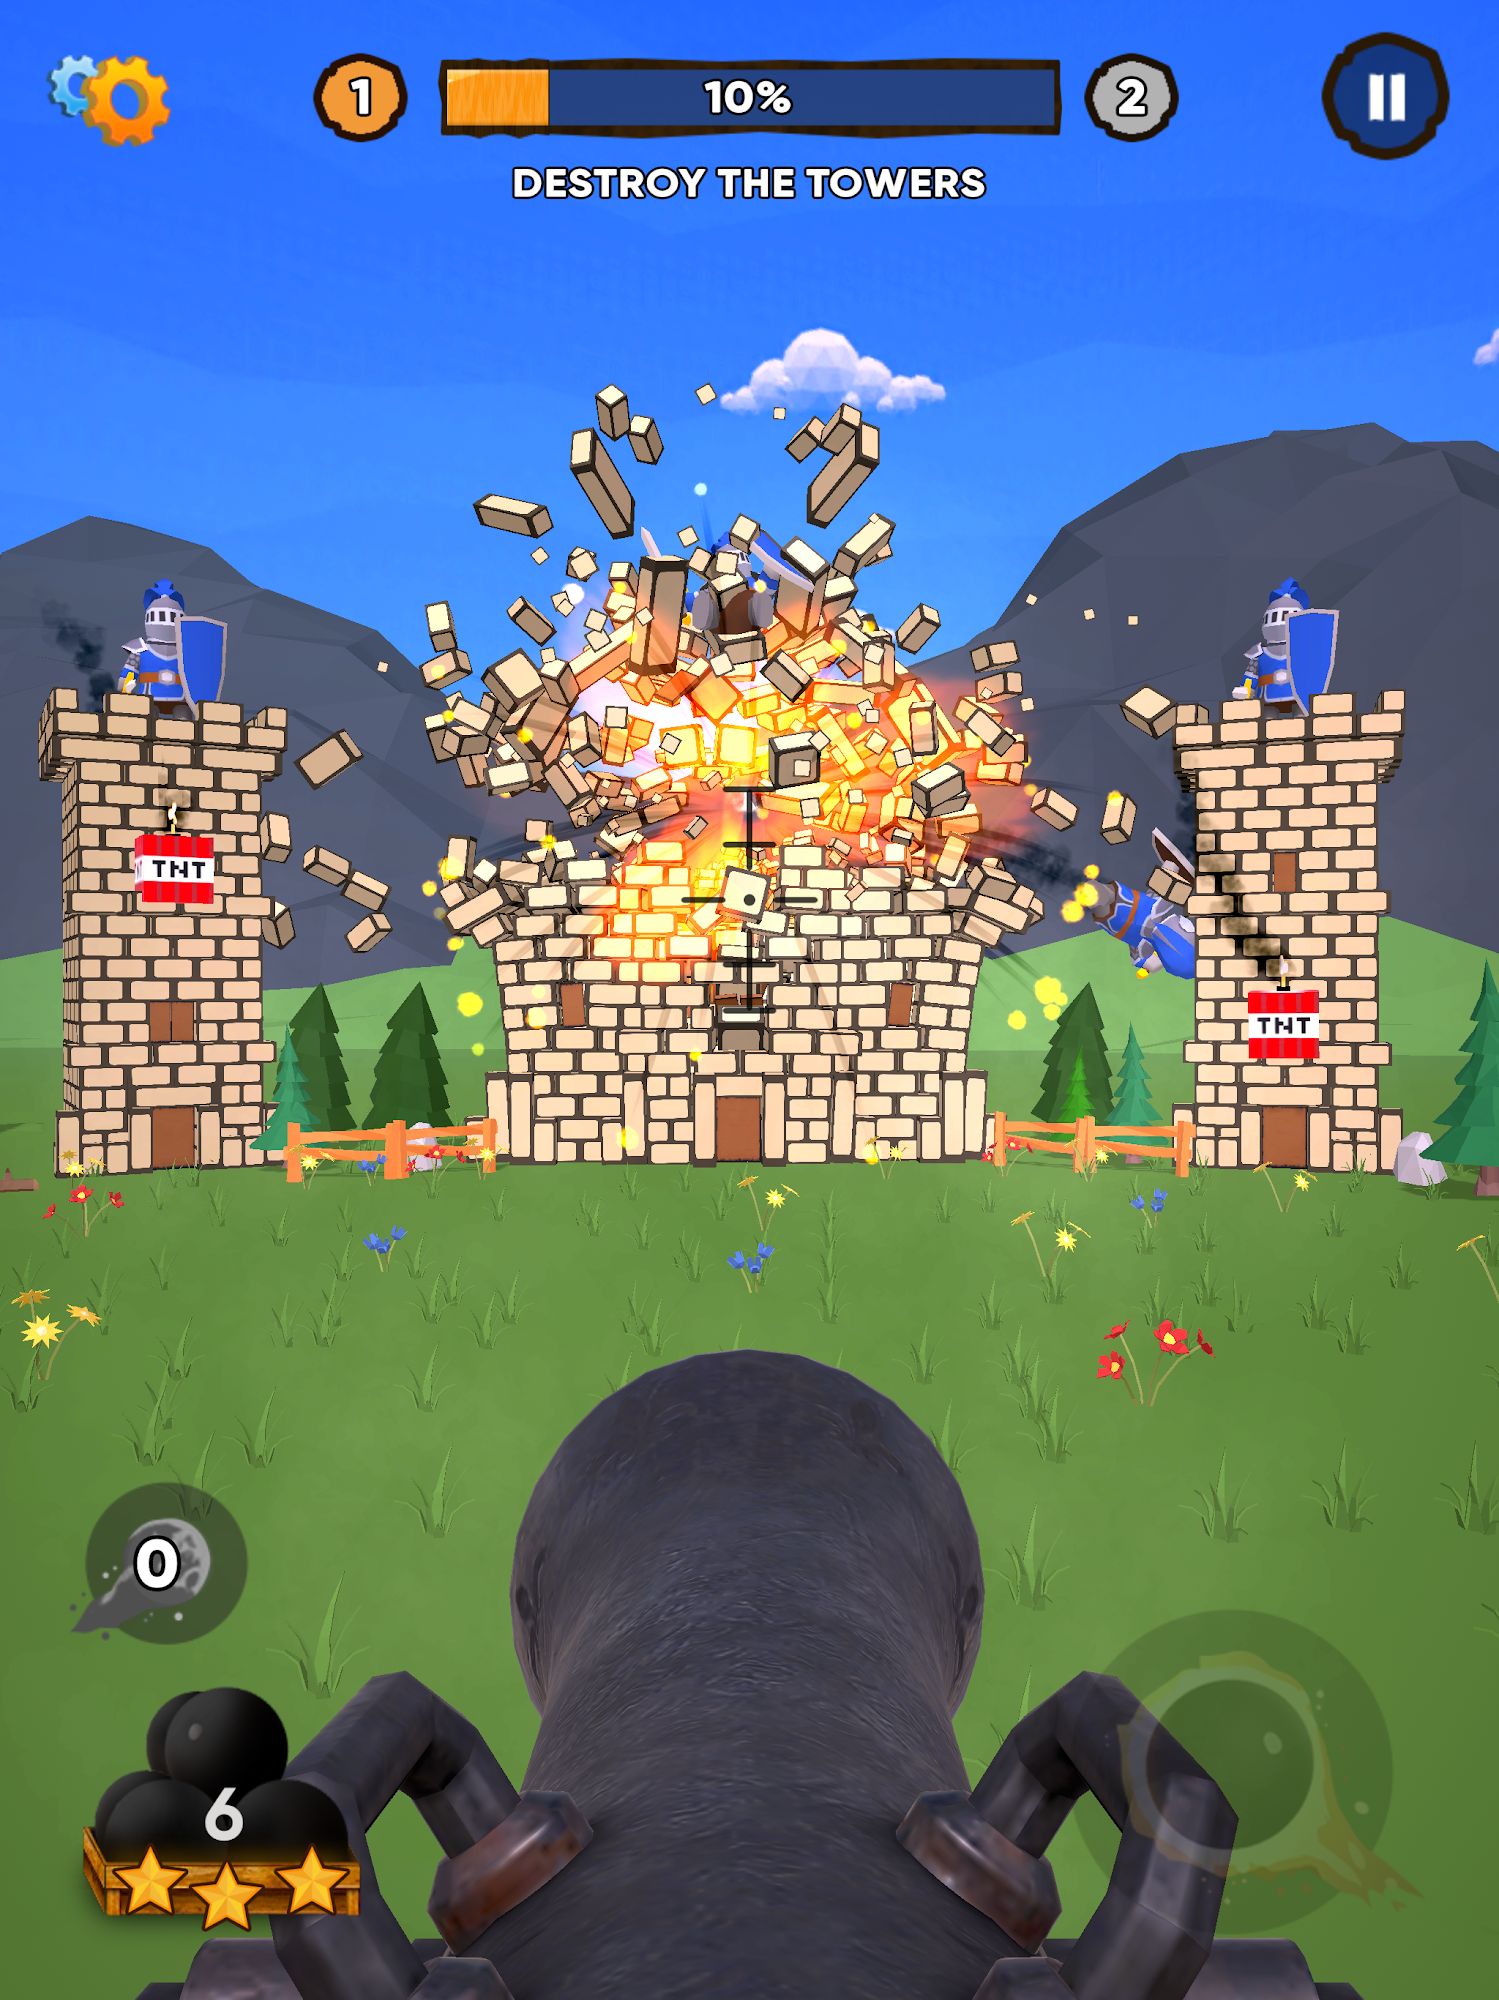 download pocket tank game for android